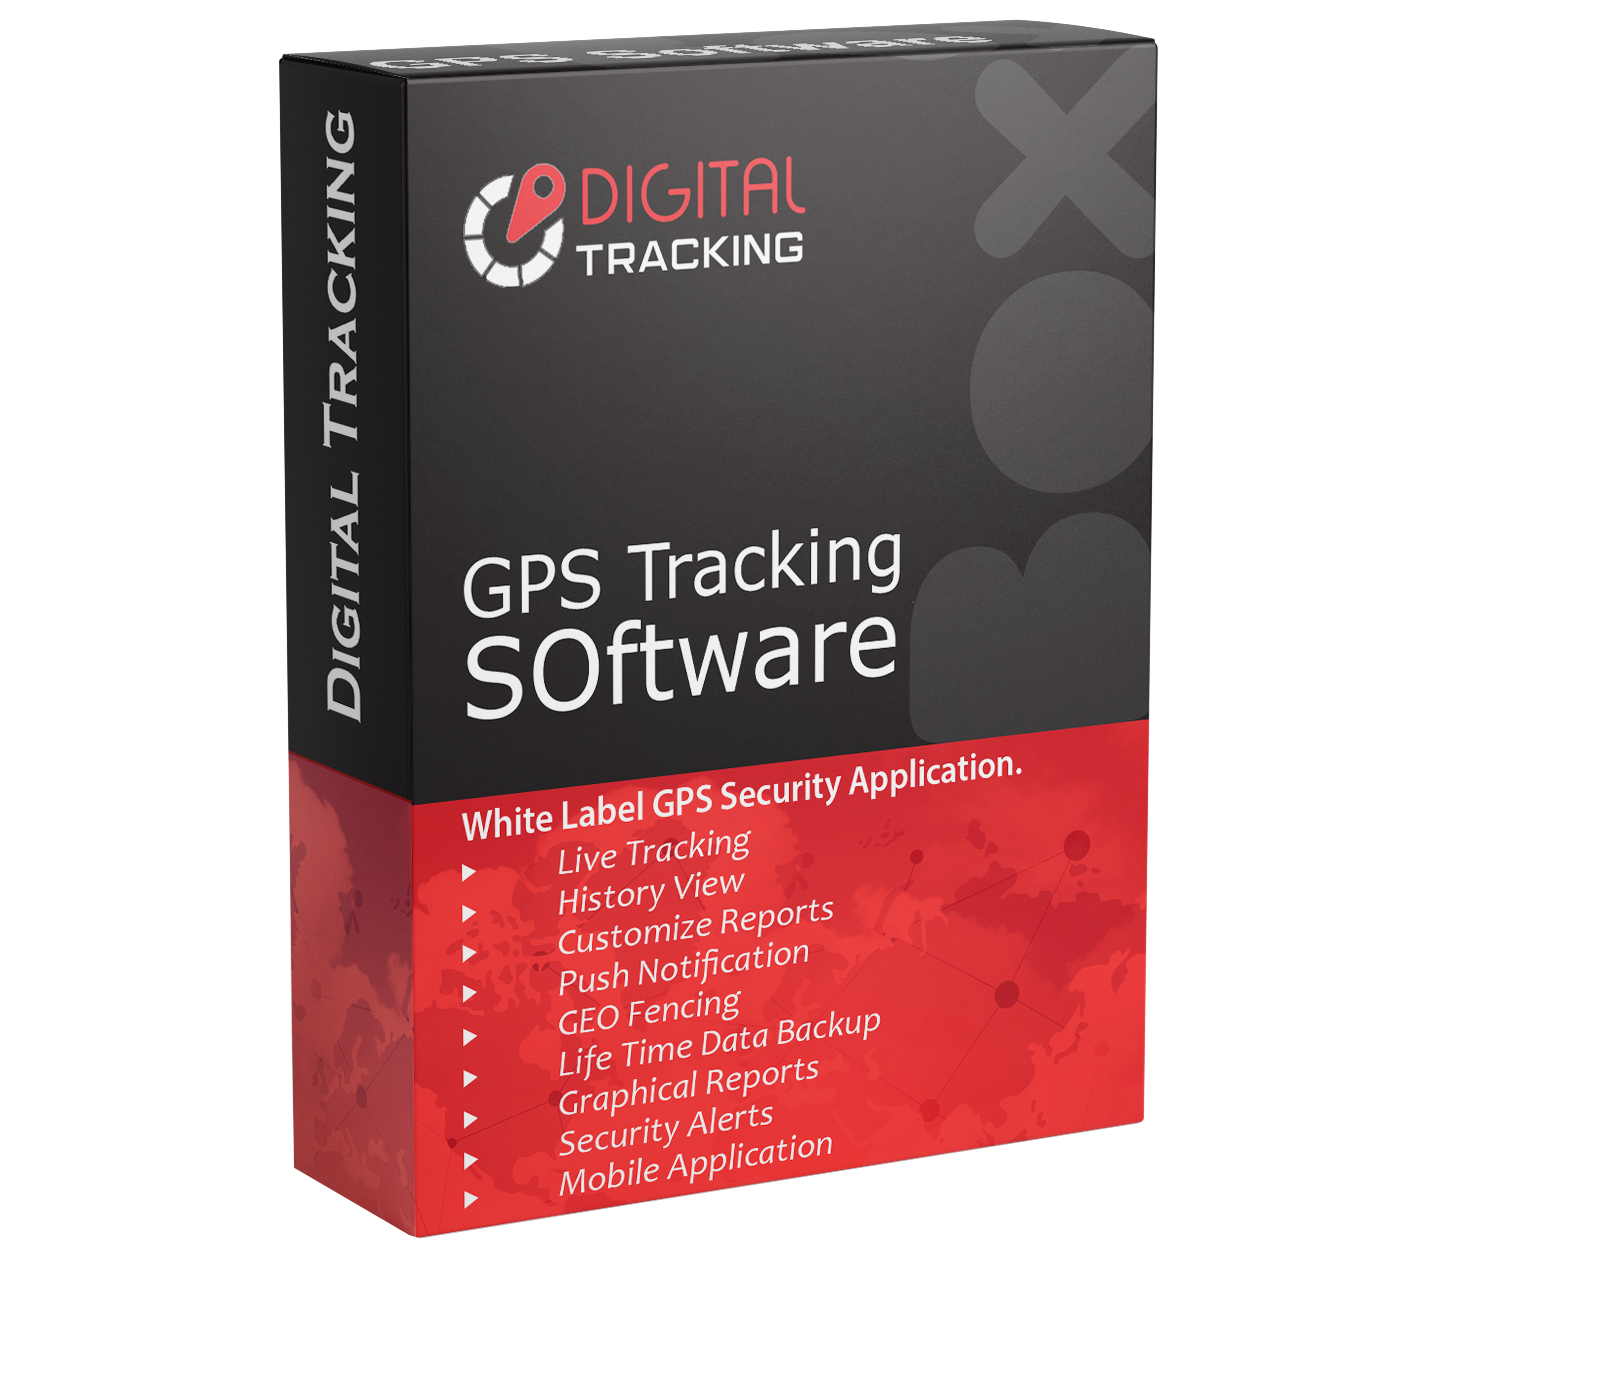 gps tracking software in india, gps tracking software white label, gps tracking software buy, bus gps tracking software